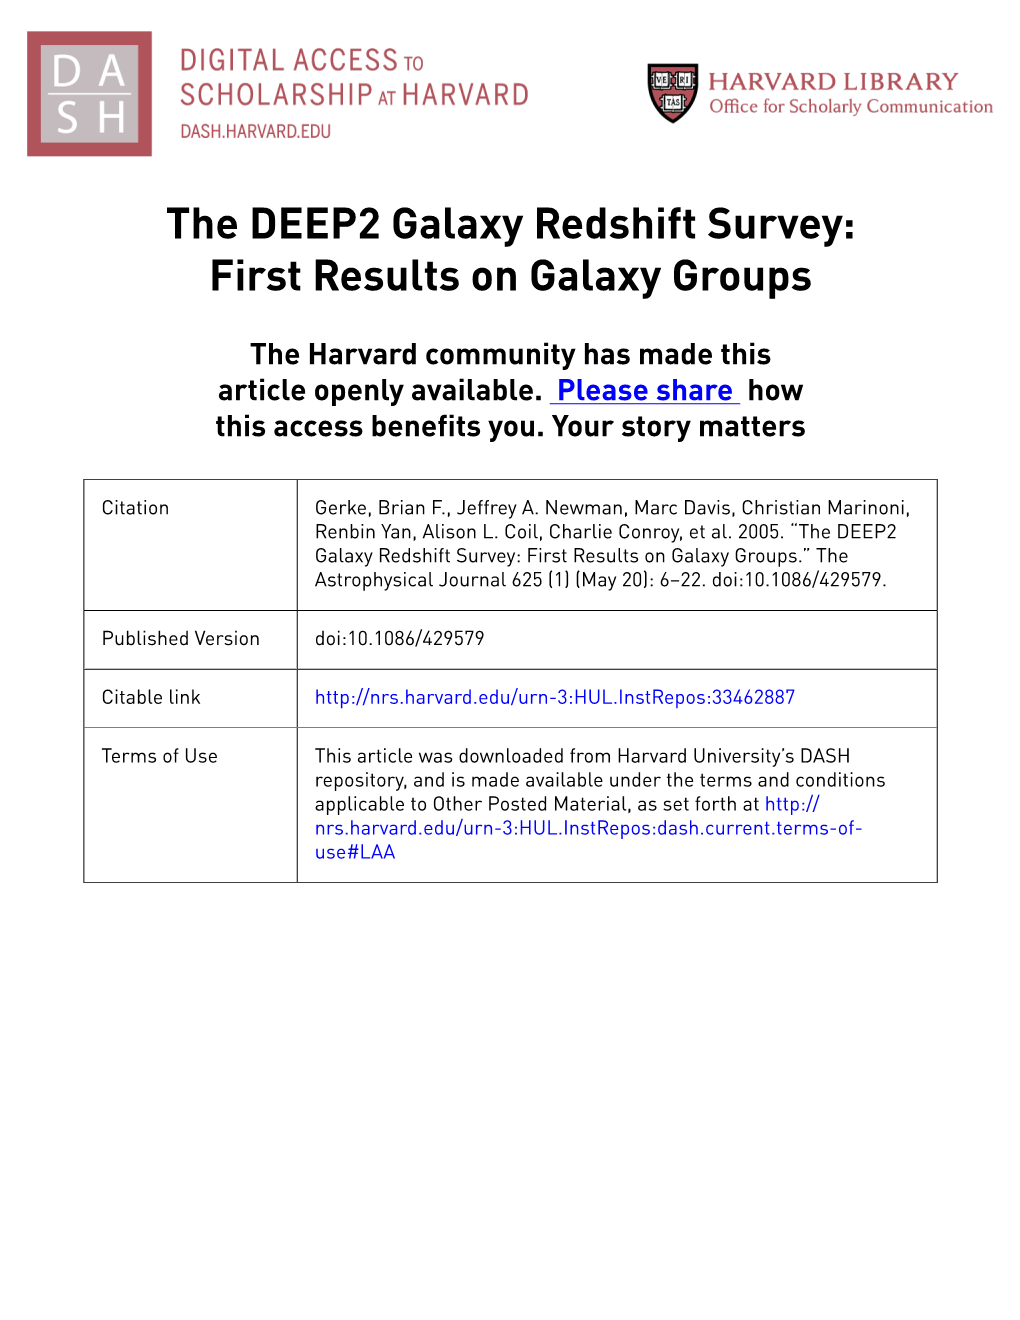 The DEEP2 Galaxy Redshift Survey: First Results on Galaxy Groups